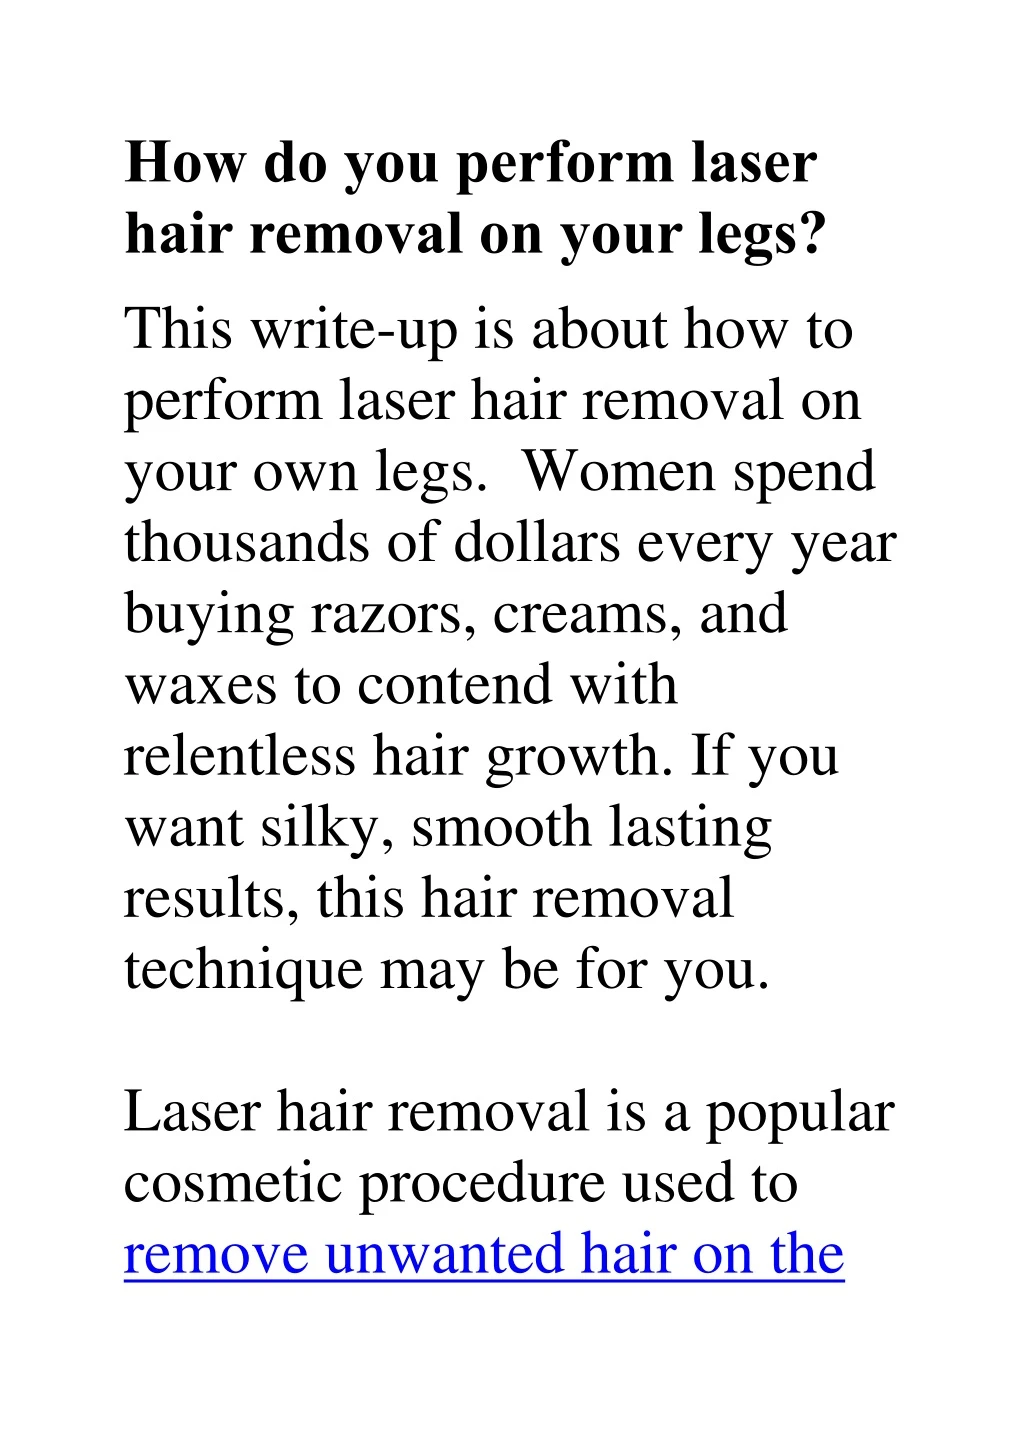 how do you perform laser hair removal on your